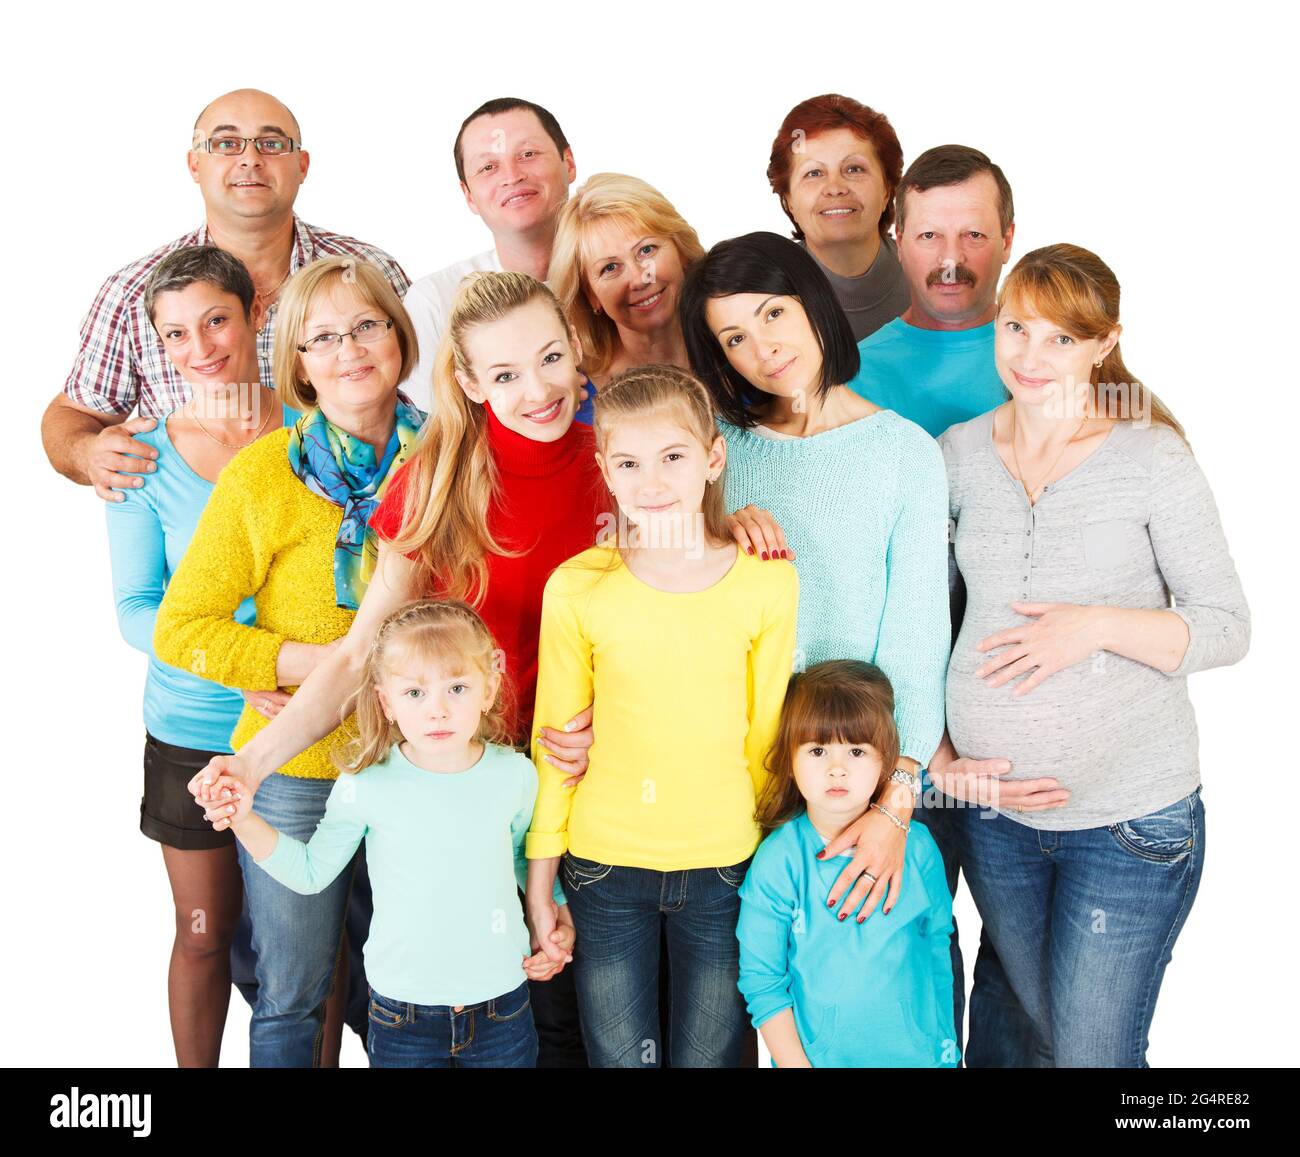 Portrait of a large group of a Mixed Age people smiling and embracing together. Stock Photo